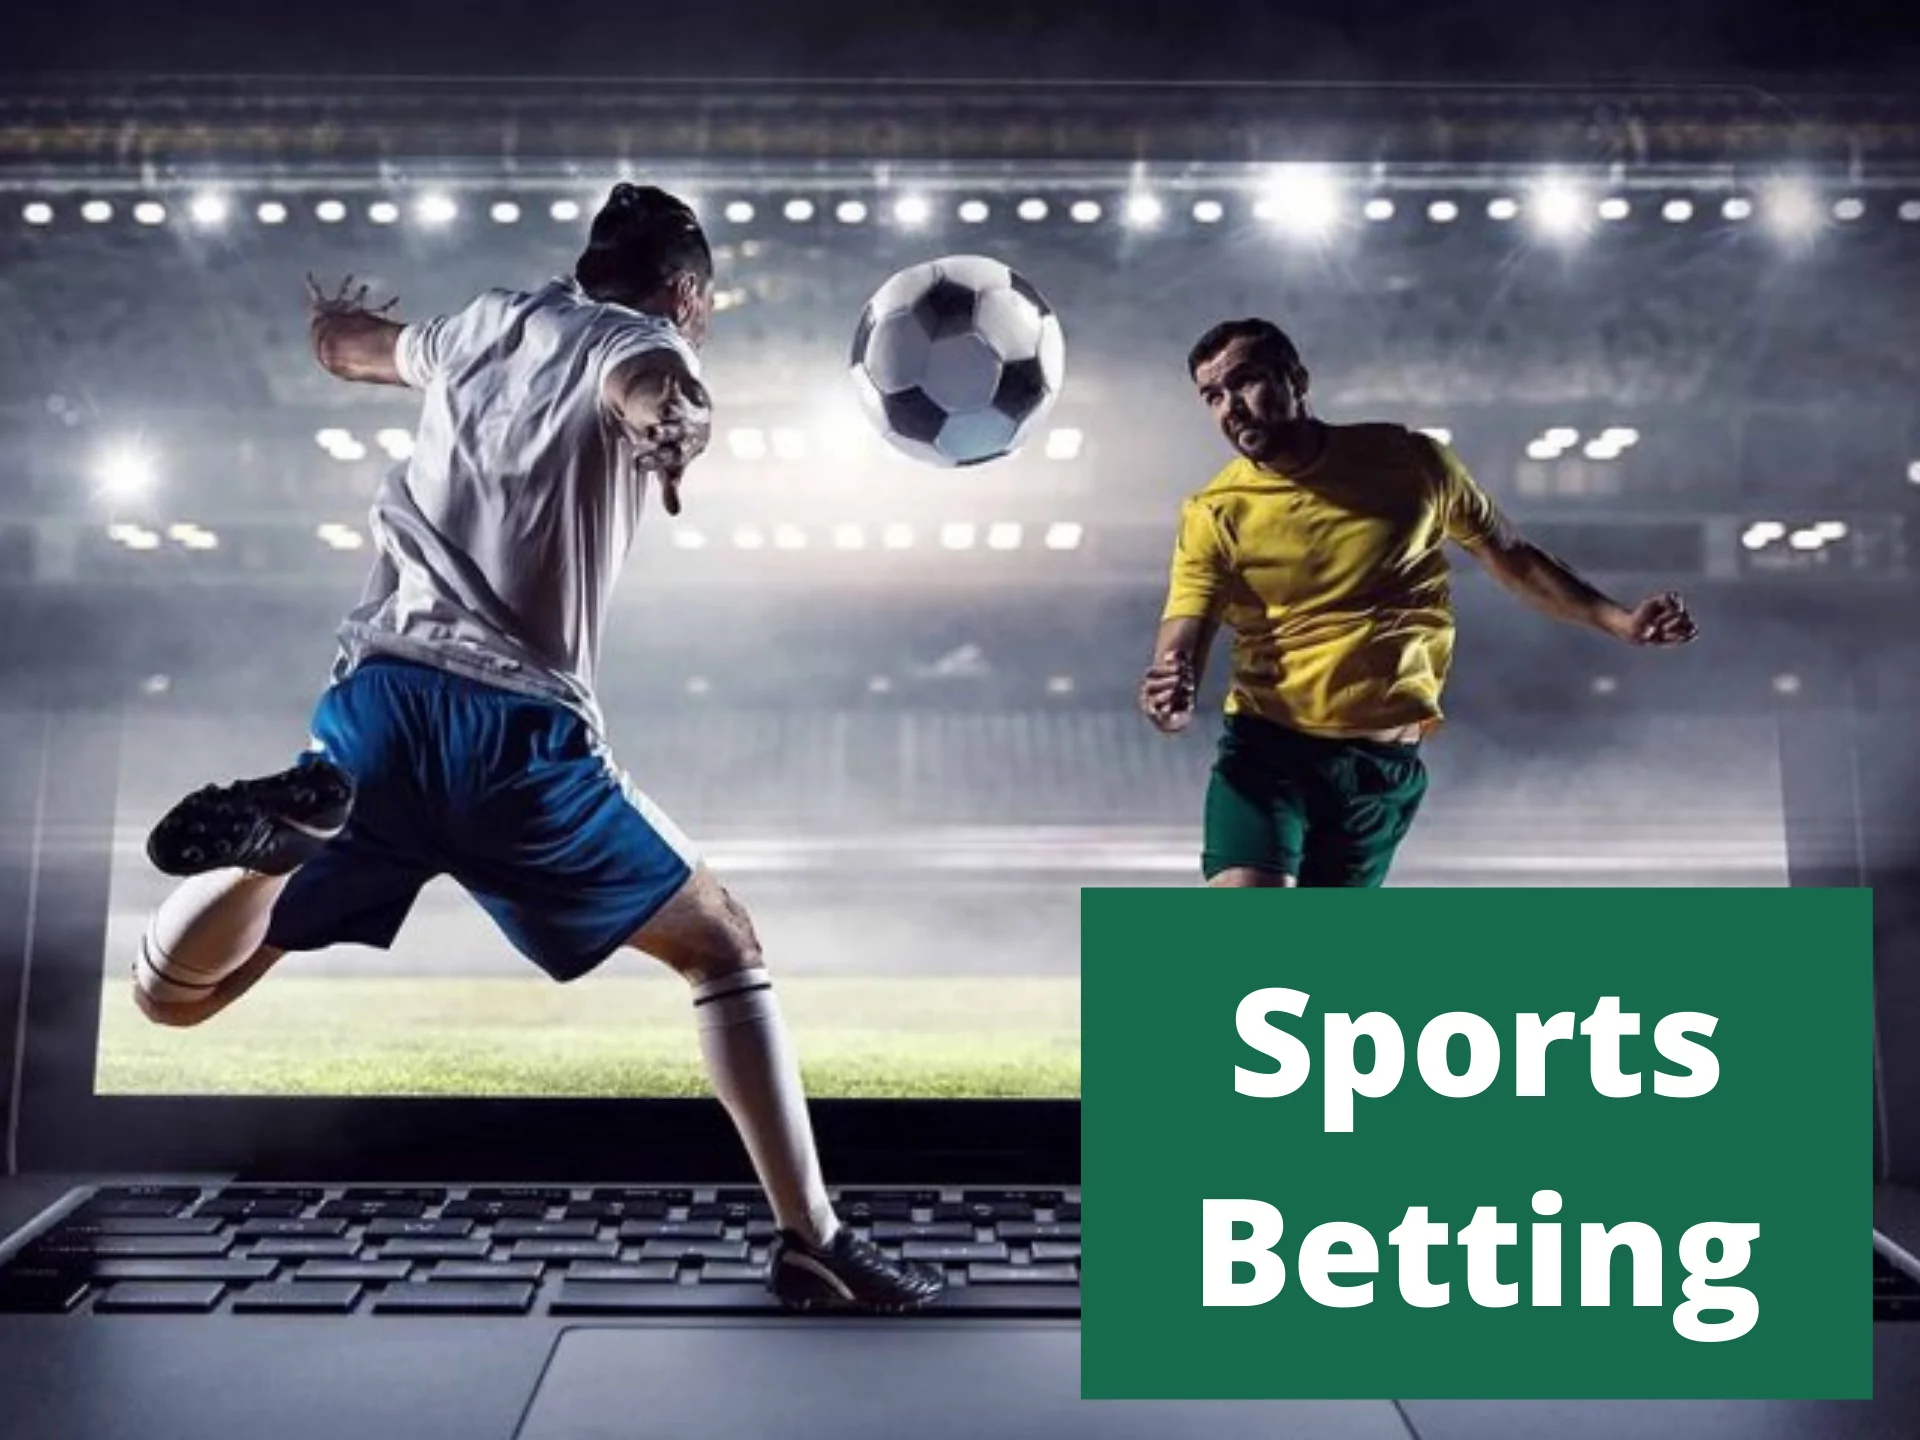 Every day you can bet on hundreds of different sports events and we will inform you about the most interesting ones on the main page.